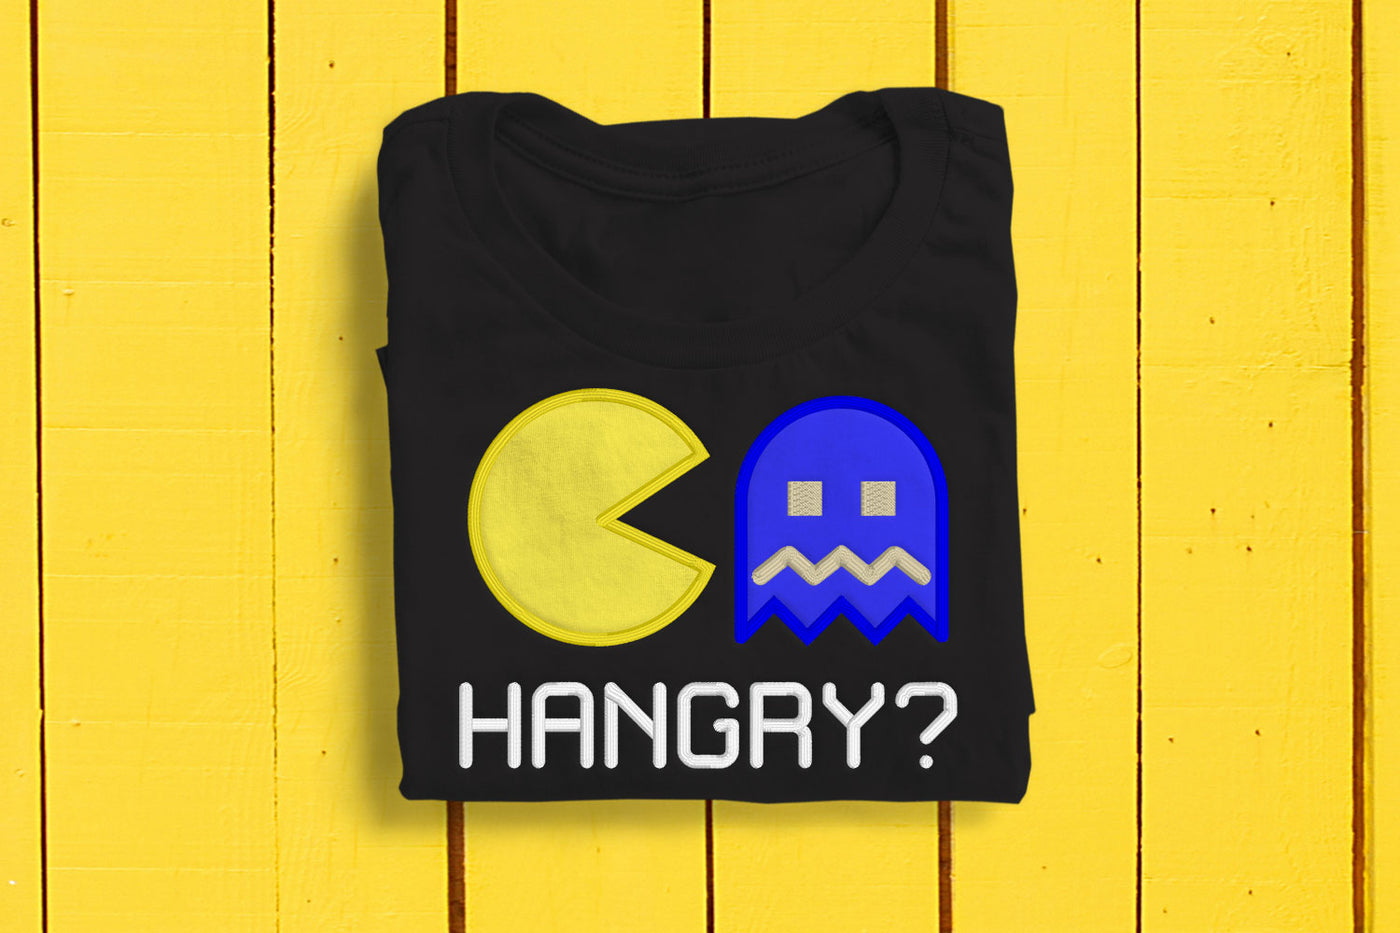 Hangry Ghost Chaser Applique Embroidery File